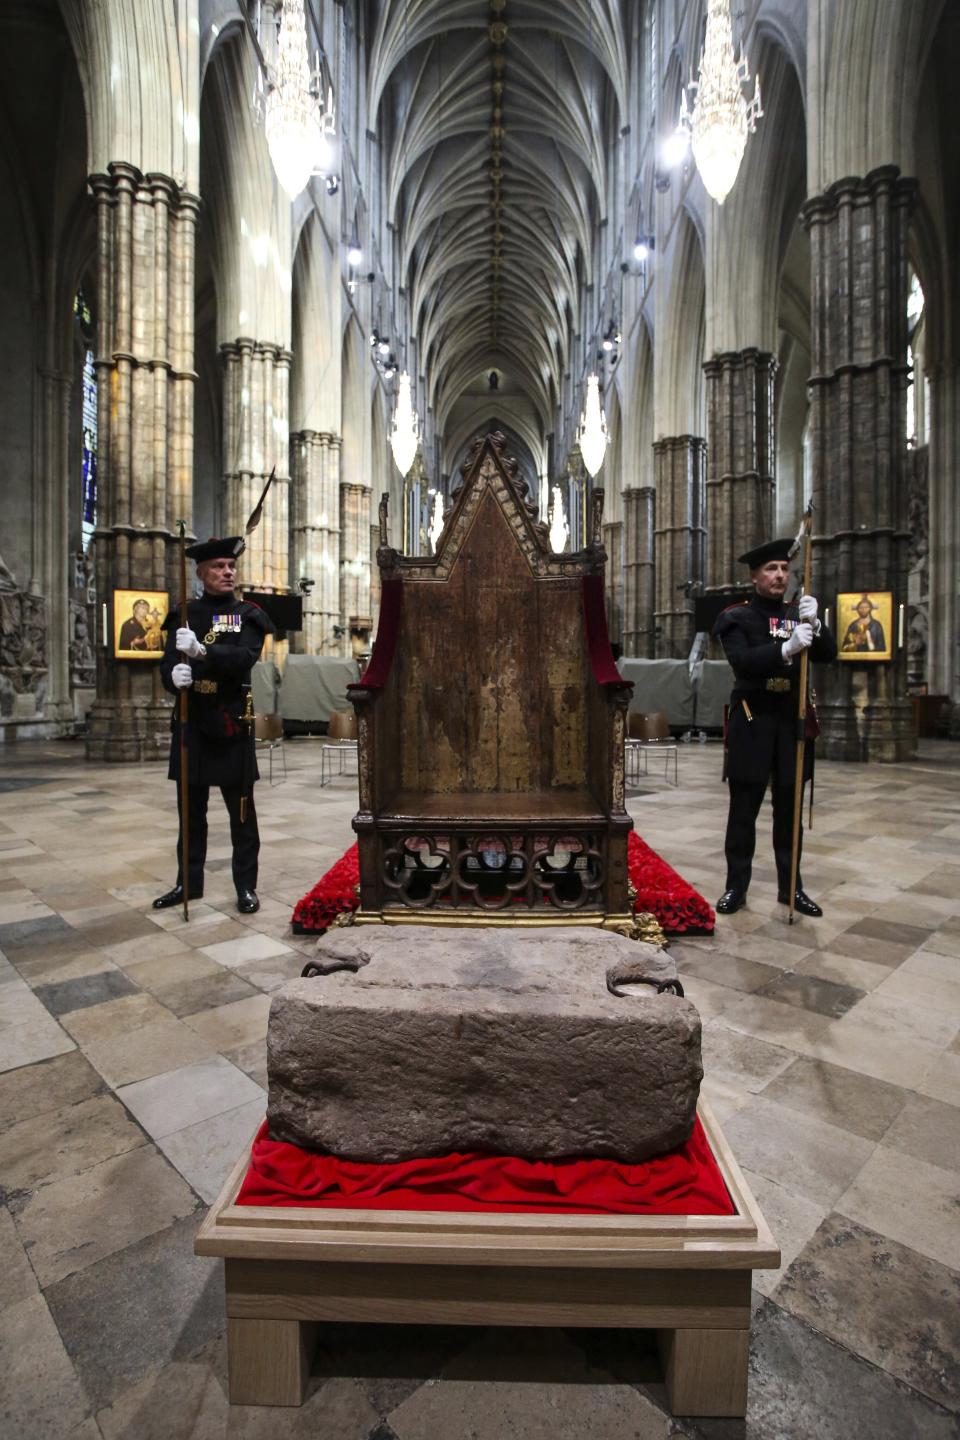 King's Bodyguards for Scotland and members of Royal Company of Archers Alex Baillie-Hamilton, left, and Paul Harkness stand guard by the Stone of Destiny, during a welcome ceremony ahead of the coronation of Britain's King Charles III, in Westminster Abbey, London, Saturday, April 29, 2023. (Susannah Ireland/Pool Photo via AP)